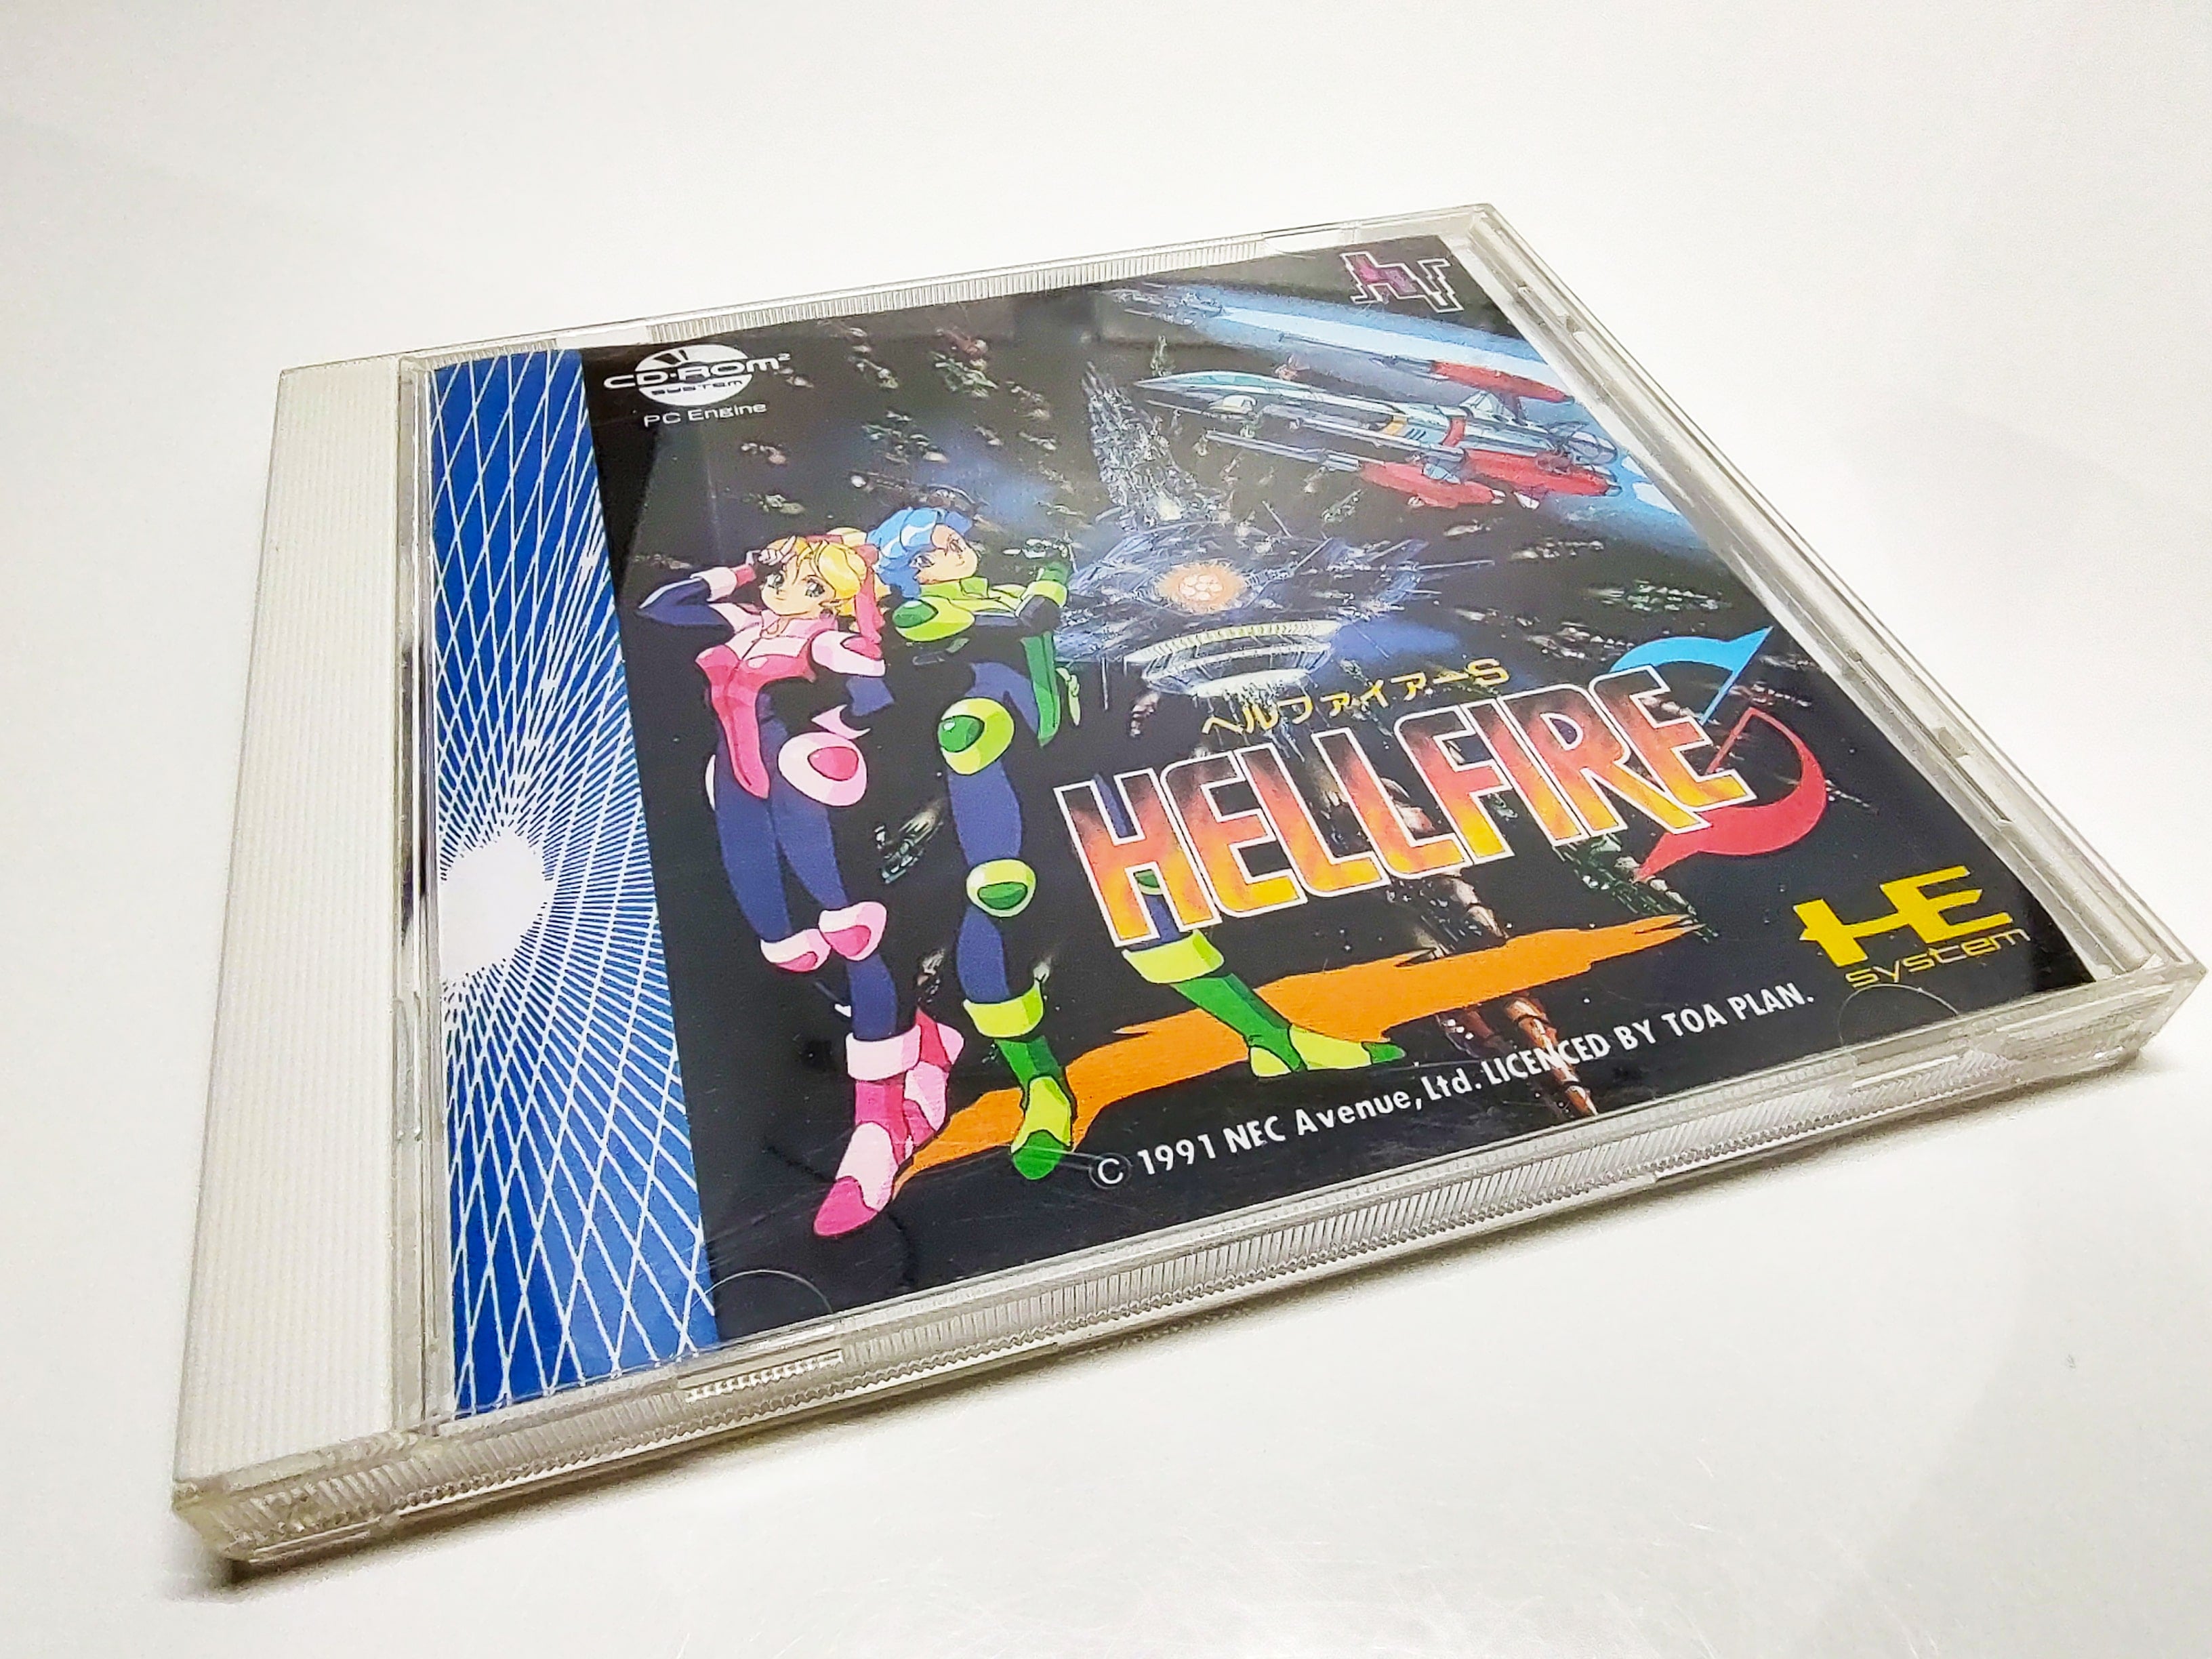 Hellfire S: The Another Story